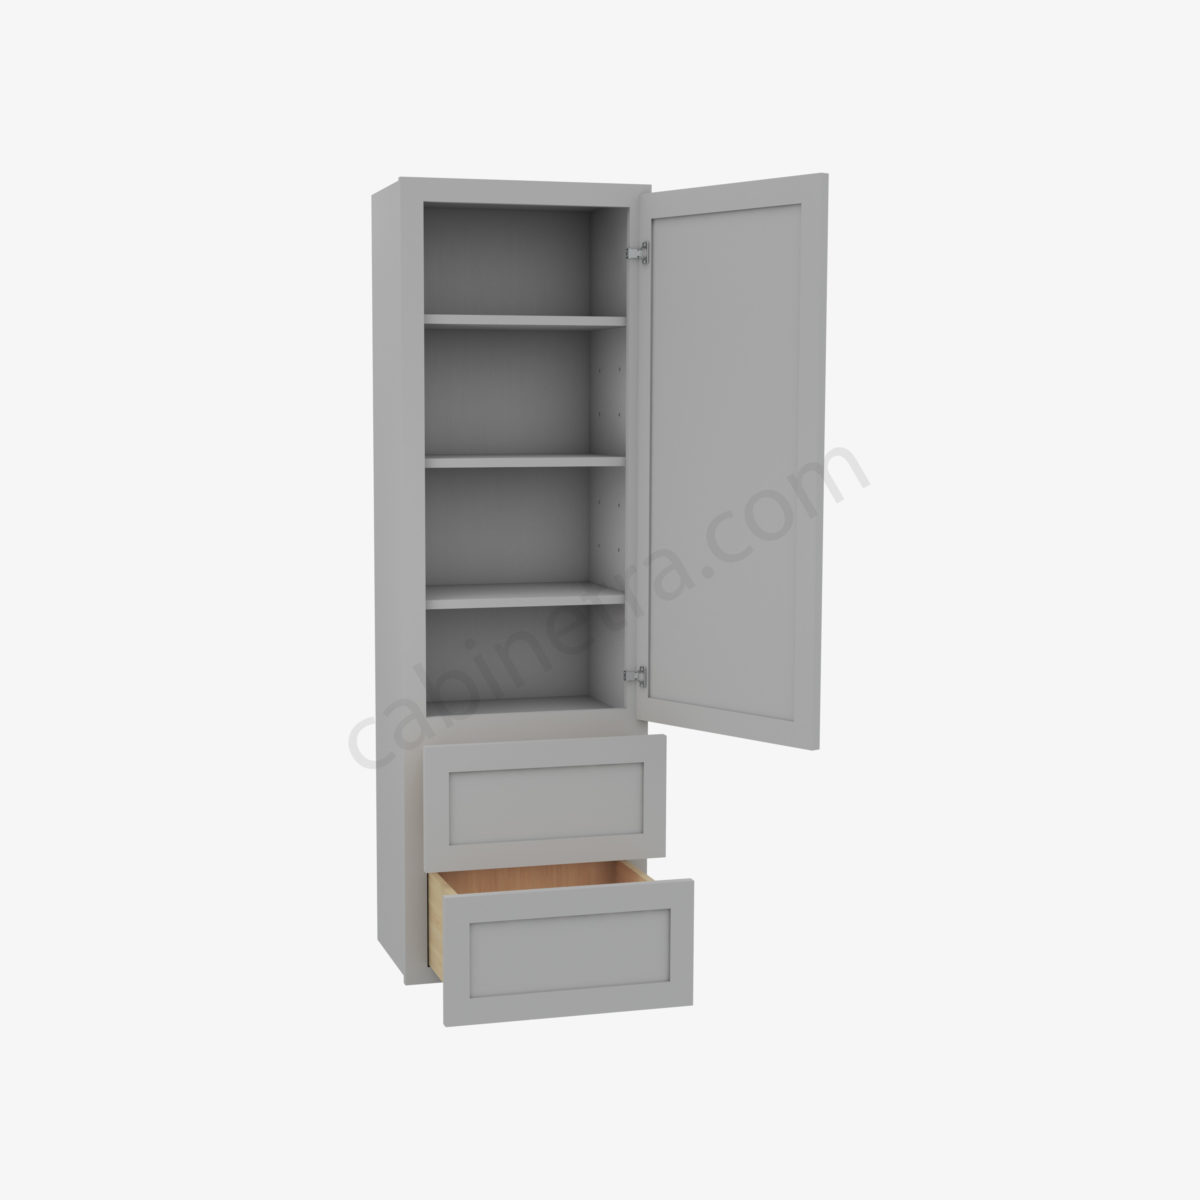 AB W2D1860 1 Forevermark Lait Gray Shaker Cabinetra scaled